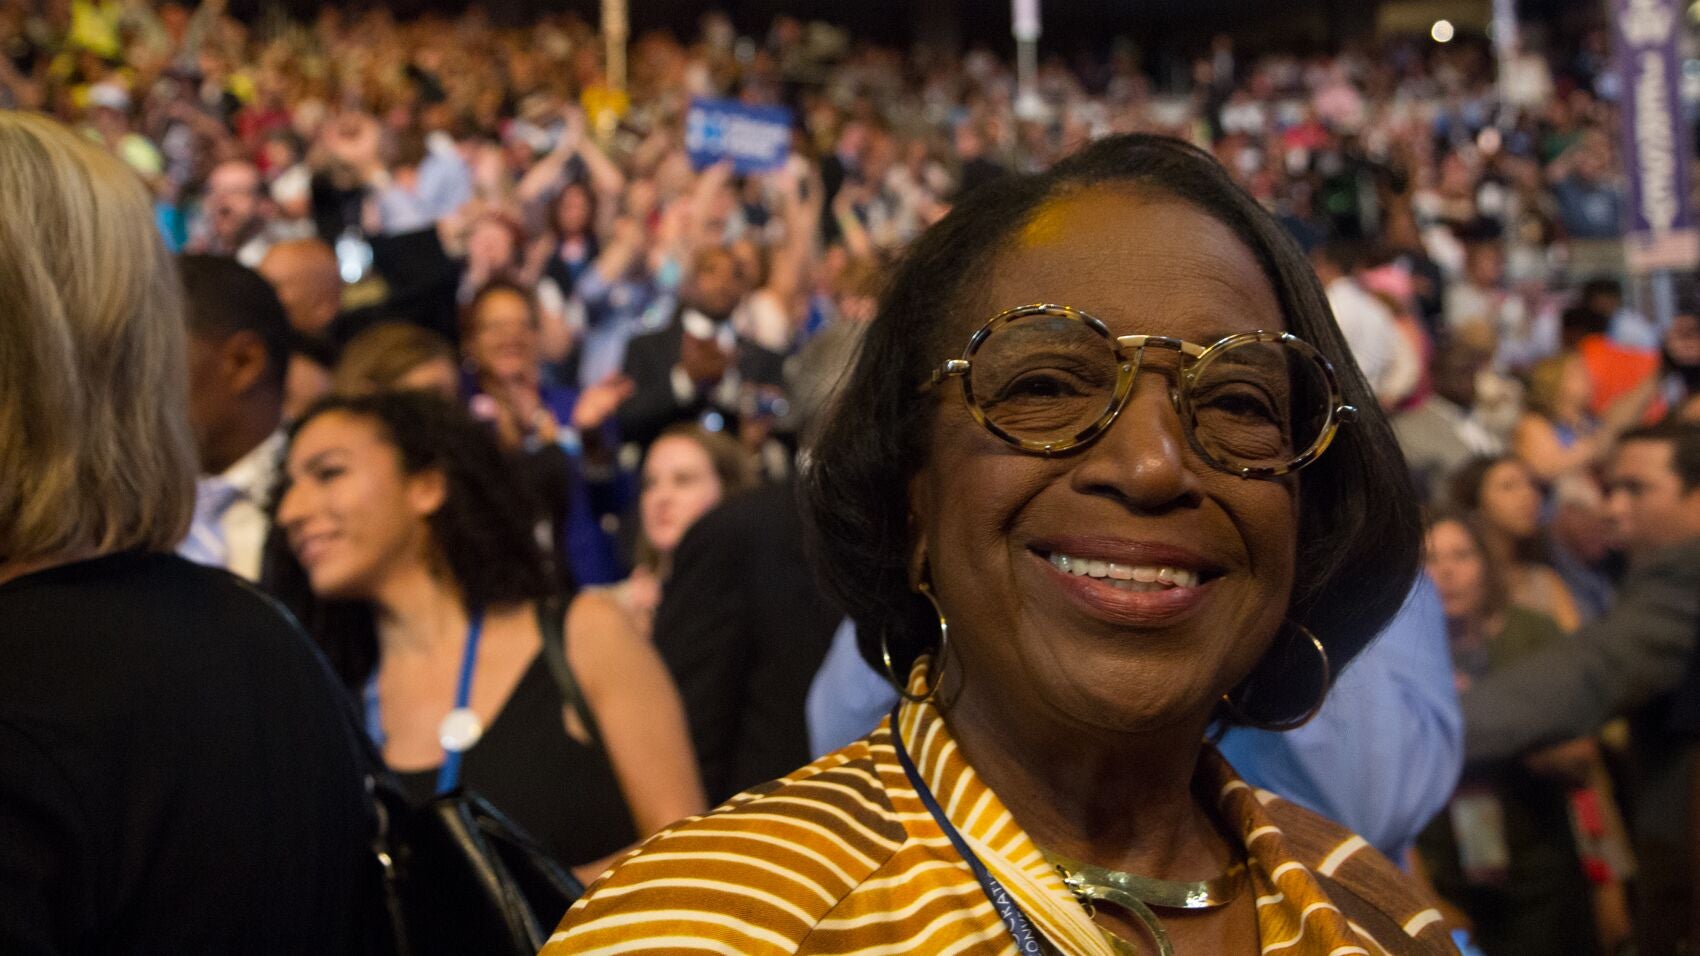 Former Philadelphia Councilwoman Marian Tasco says she expects most Sanders supporters will unify behind Hillary Clinton. (Kimberly Paynter/WHYY)